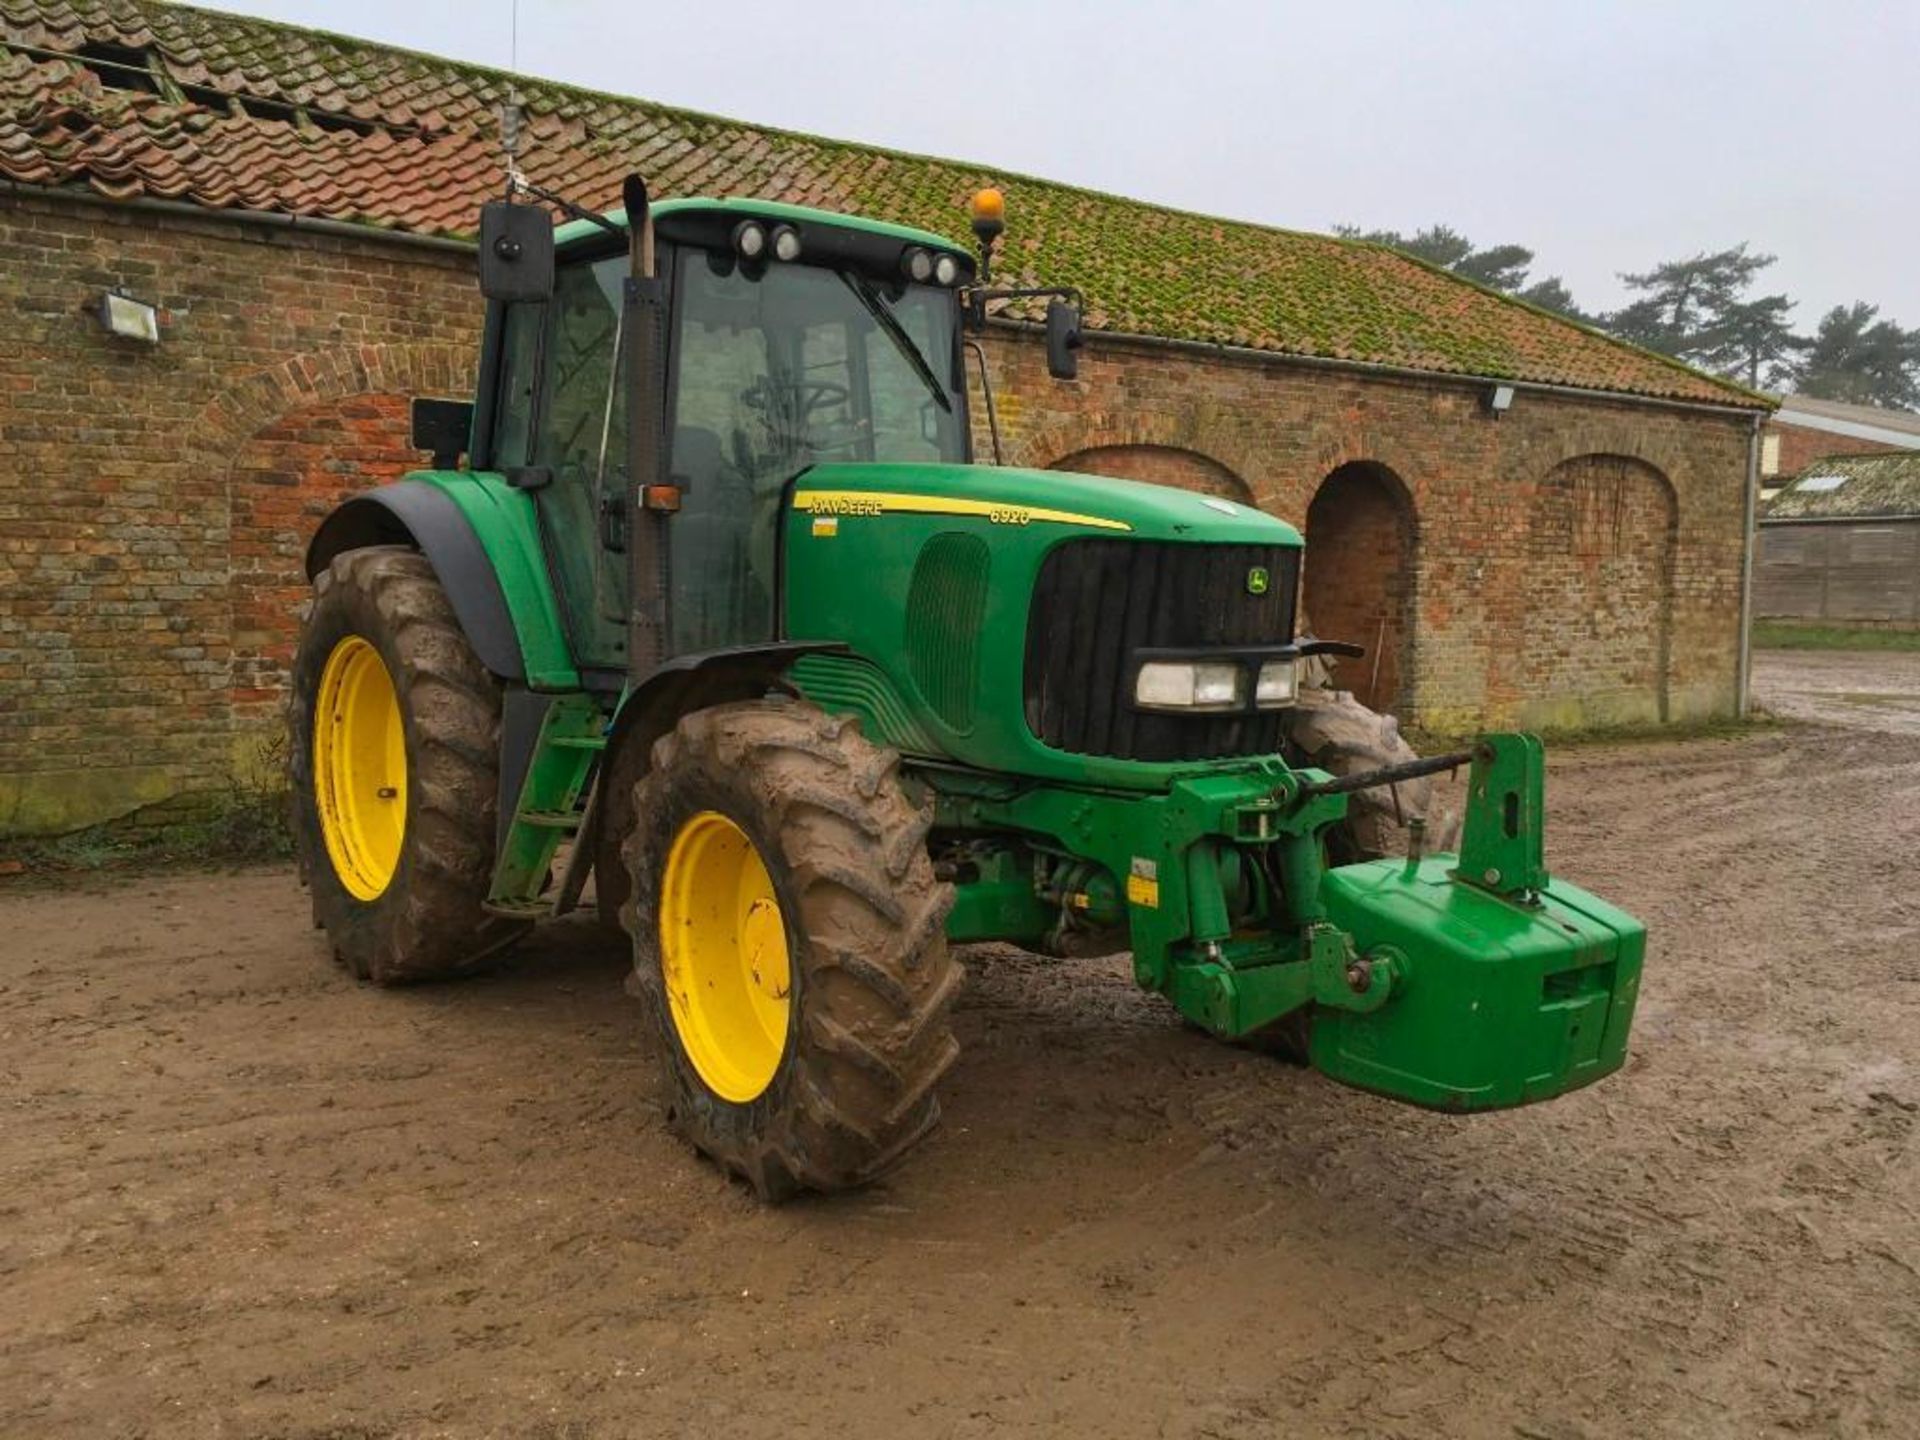 2005 John Deere 6920 40kph tractor with Power Quad gear box, 2 rear spool valves, front and rear lin - Image 4 of 9